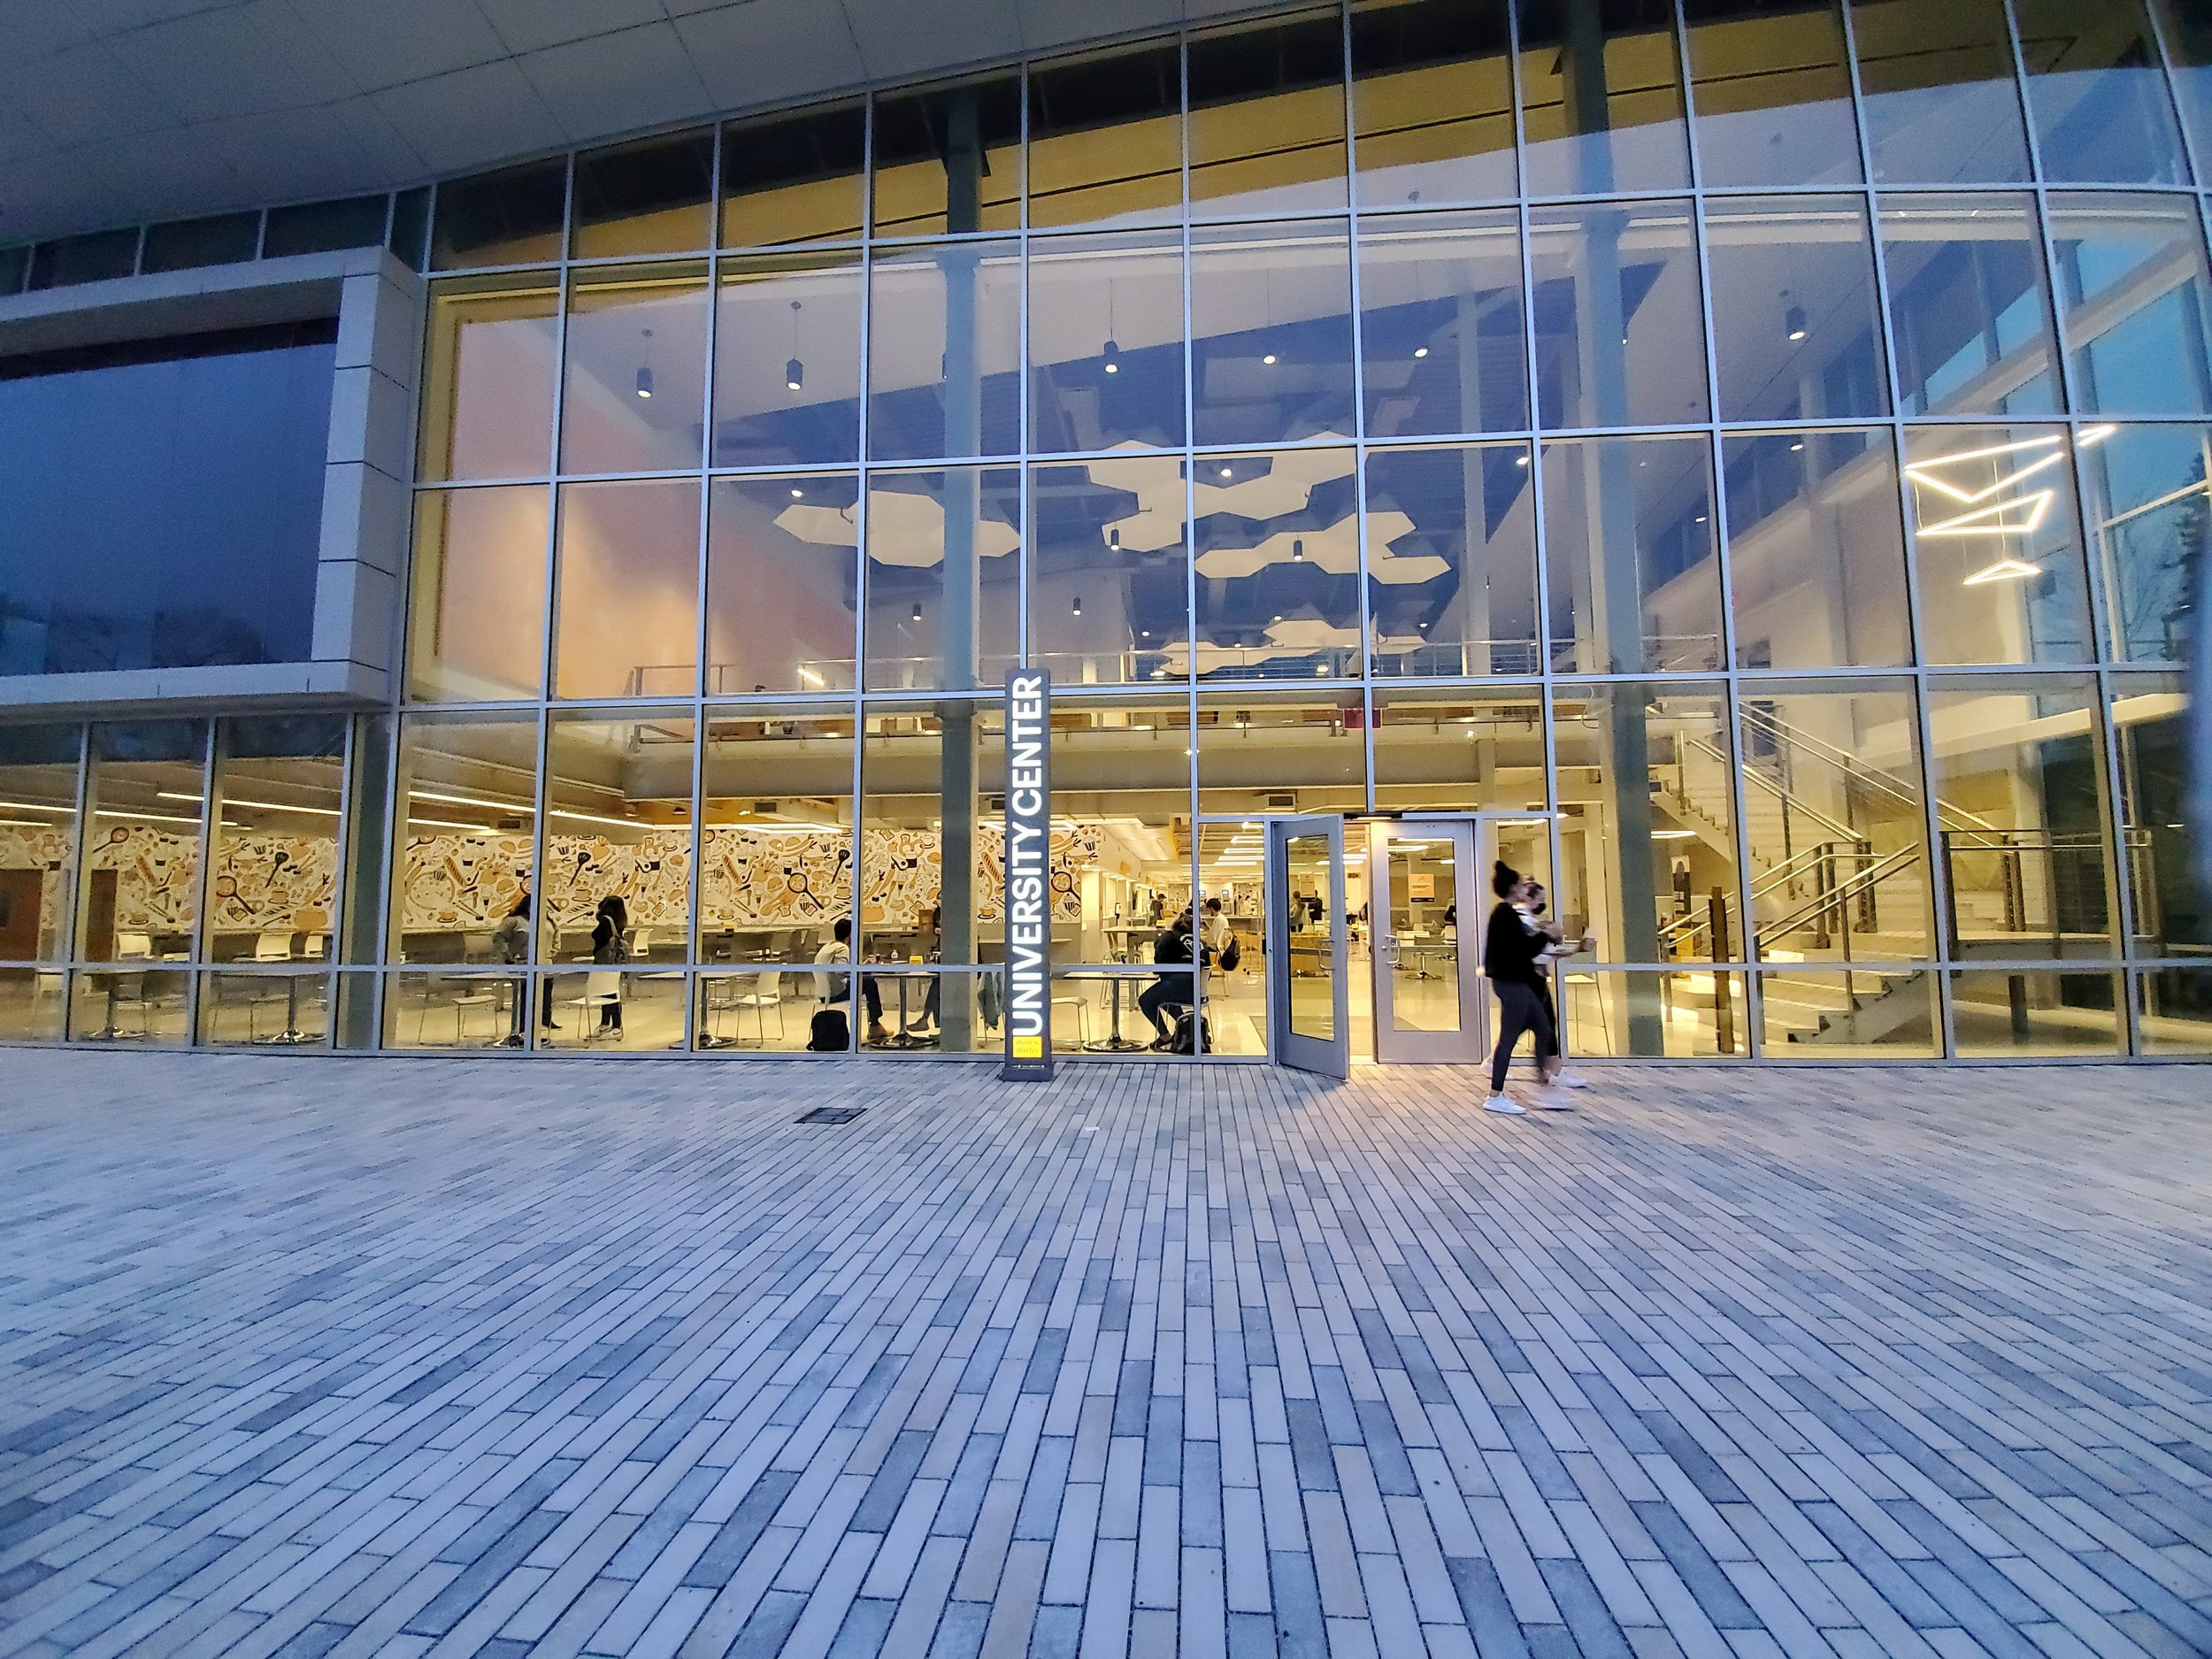 A view of the University Center entrance at twilight.